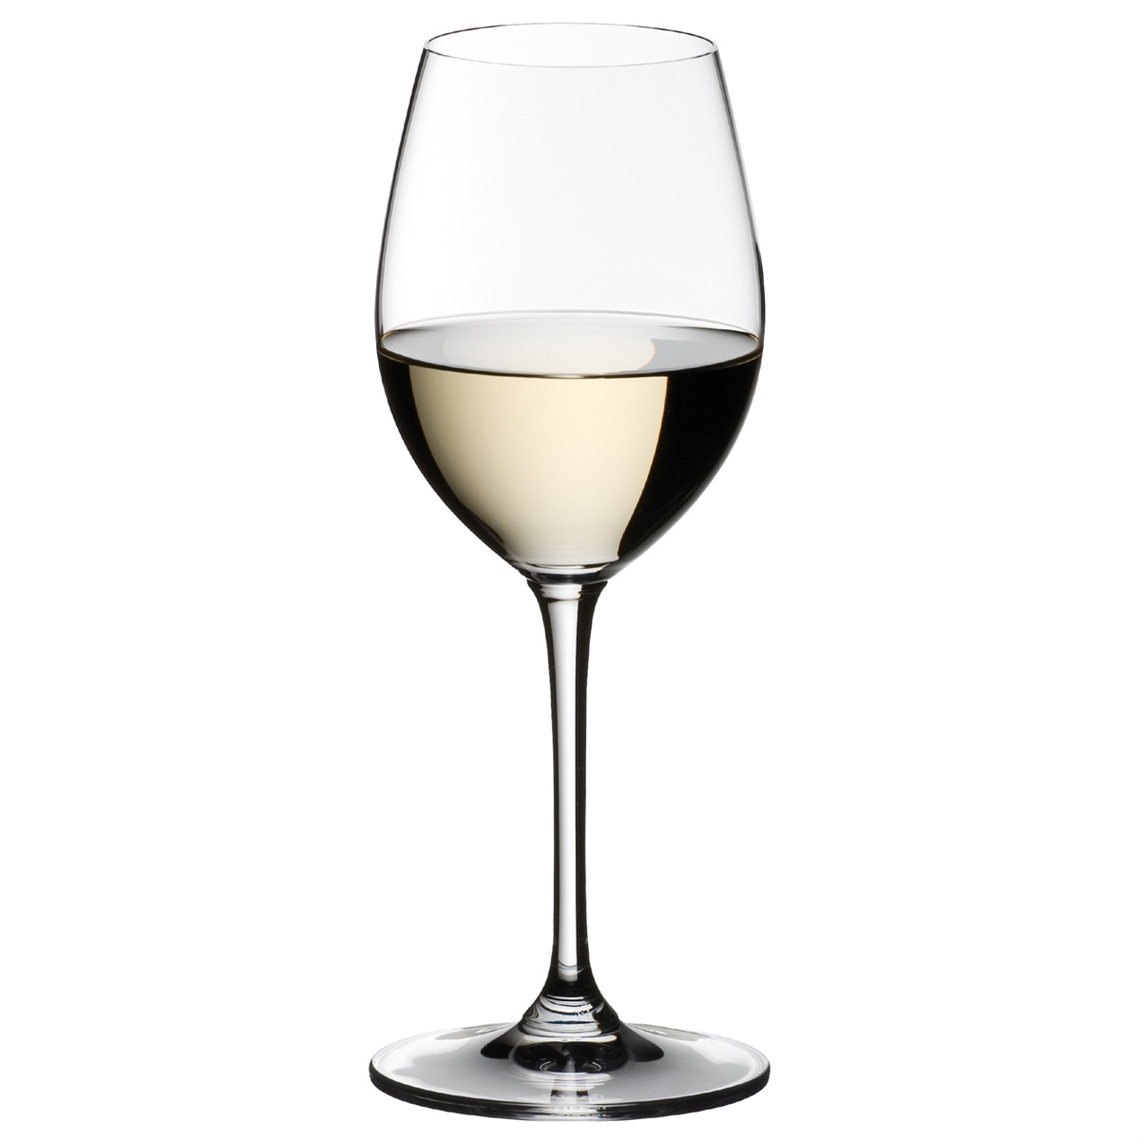 View more starlight from our Dessert Wine Glasses range